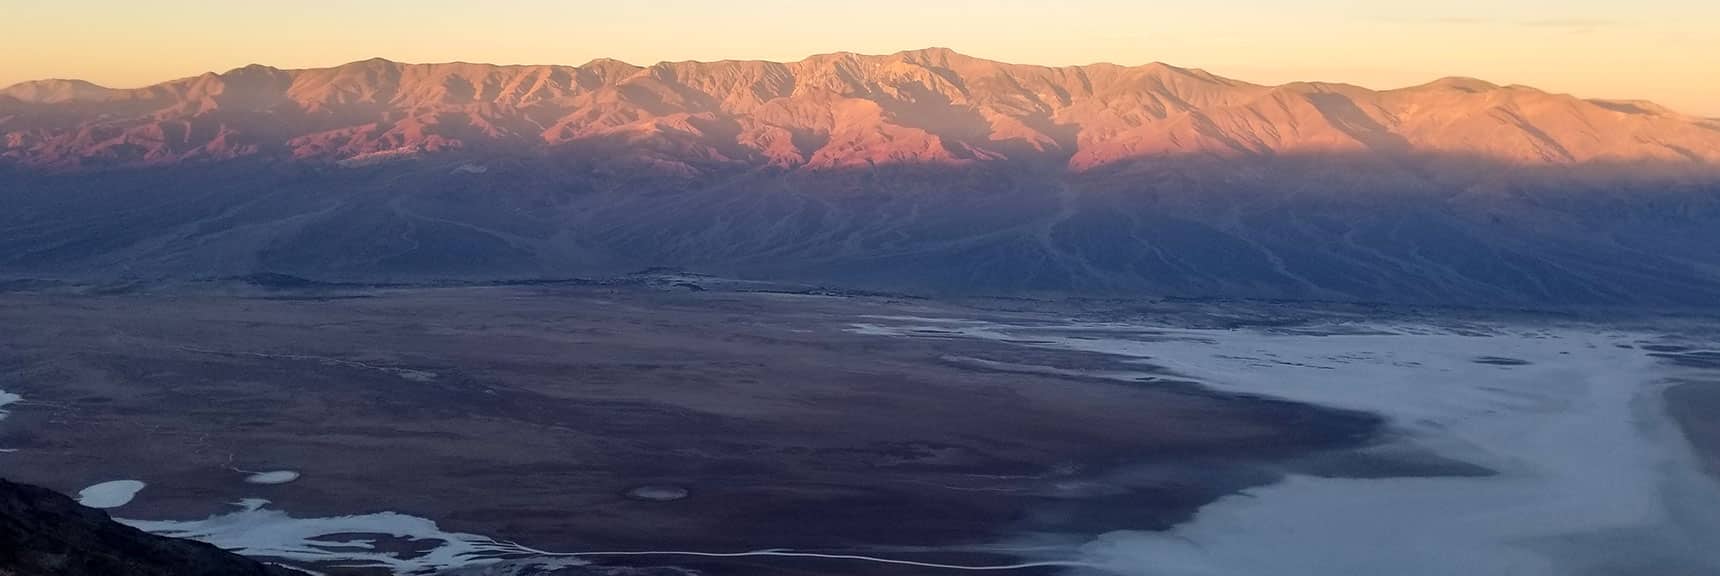 Death Valley National Park Dantes View November 24th 2018